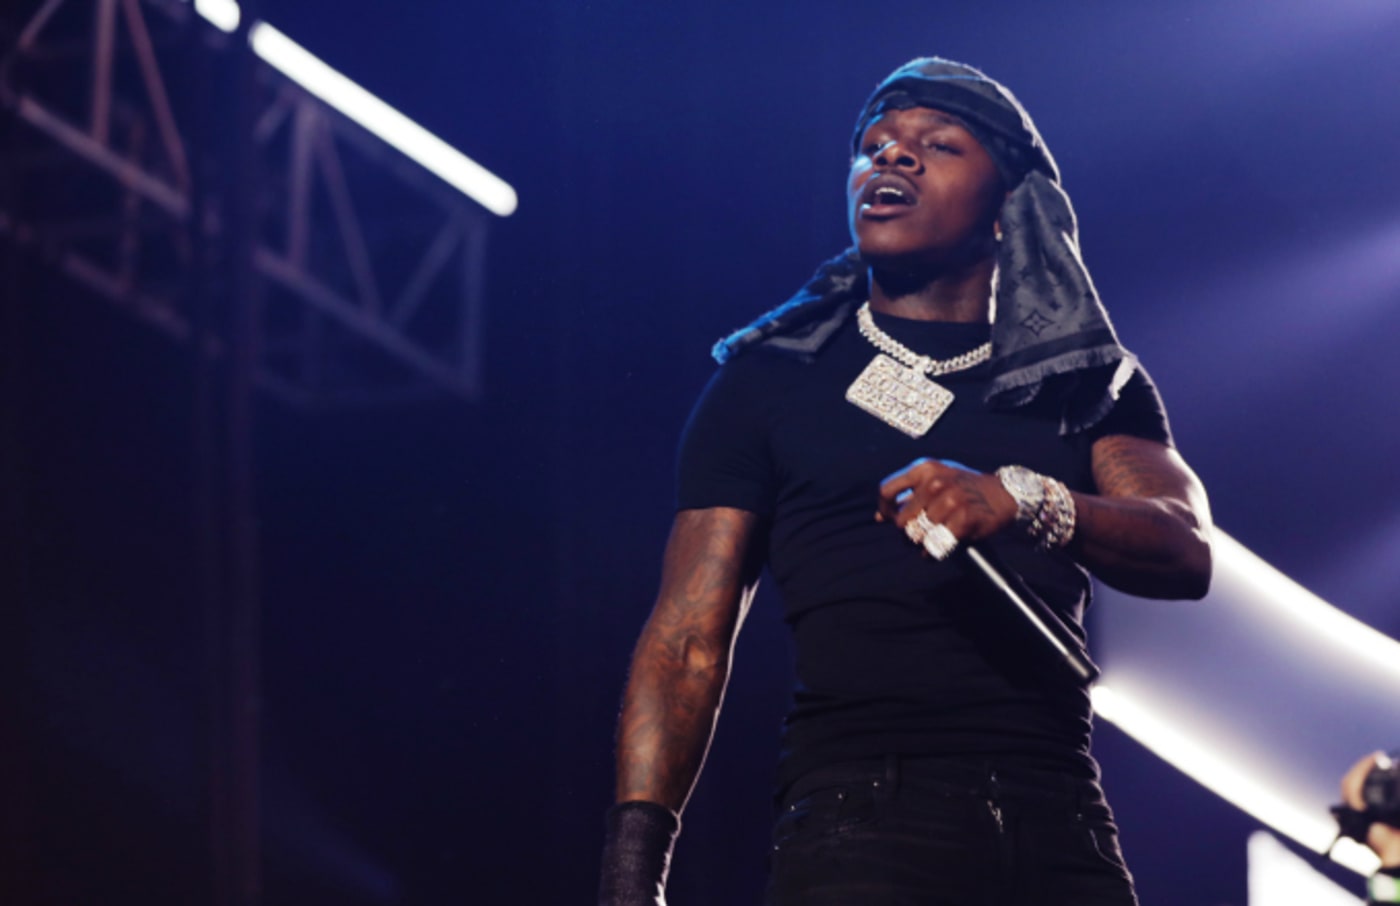 DaBaby performs onstage at the 2019 BET Experience STAPLES Center